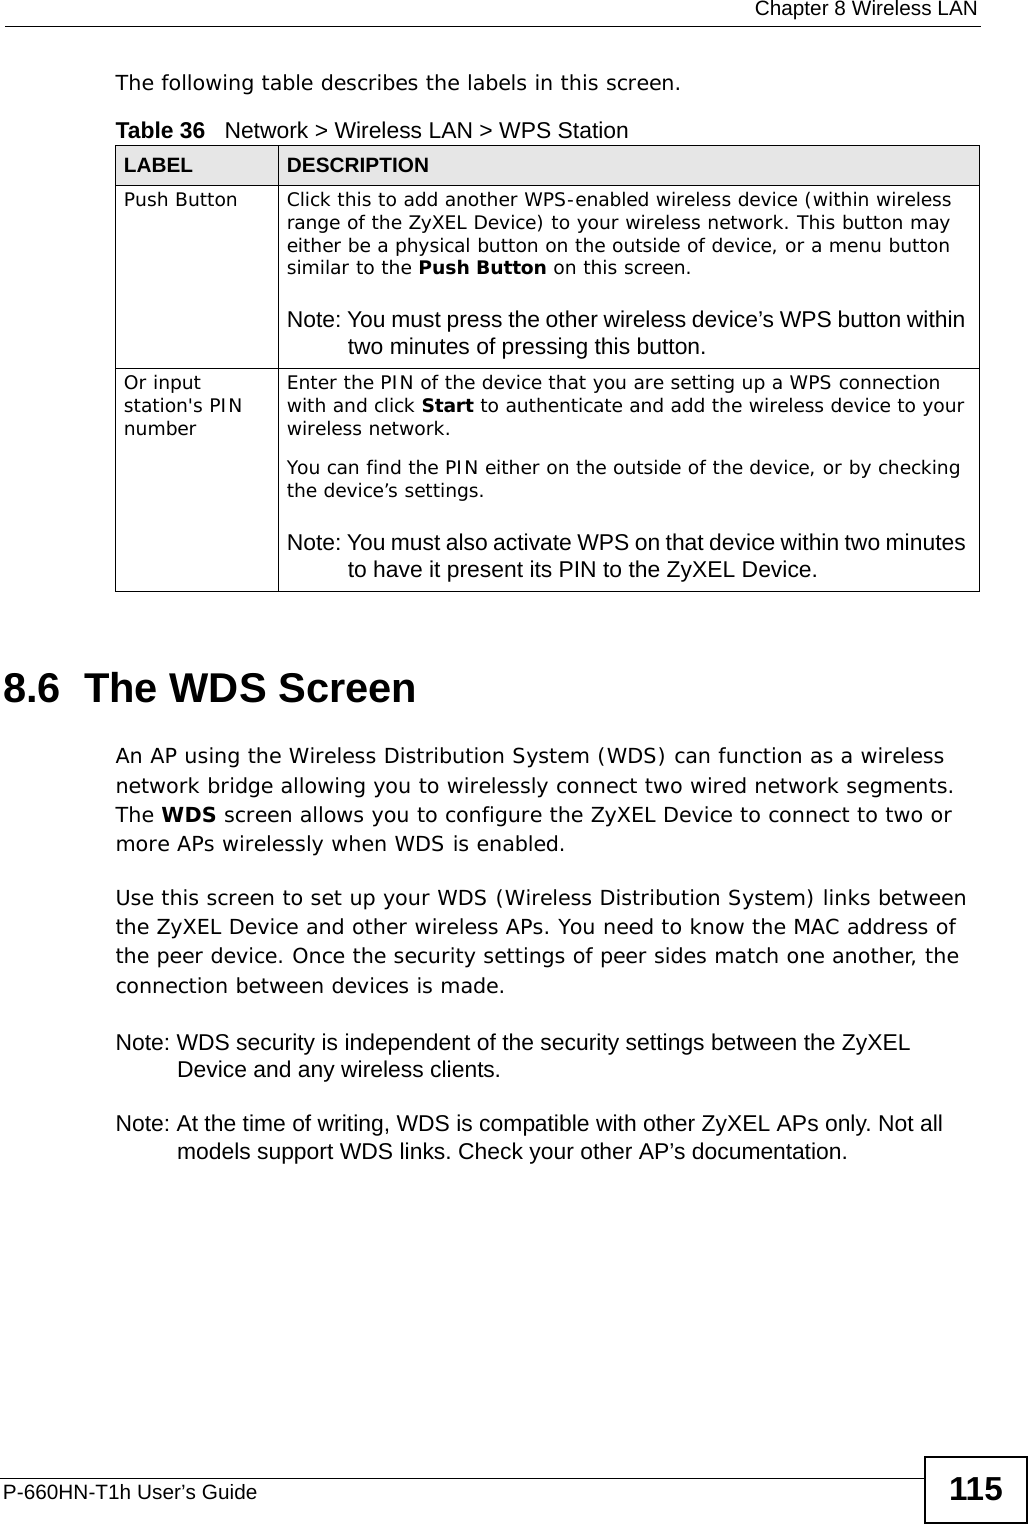  Chapter 8 Wireless LANP-660HN-T1h User’s Guide 115The following table describes the labels in this screen.8.6  The WDS ScreenAn AP using the Wireless Distribution System (WDS) can function as a wireless network bridge allowing you to wirelessly connect two wired network segments. The WDS screen allows you to configure the ZyXEL Device to connect to two or more APs wirelessly when WDS is enabled. Use this screen to set up your WDS (Wireless Distribution System) links between the ZyXEL Device and other wireless APs. You need to know the MAC address of the peer device. Once the security settings of peer sides match one another, the connection between devices is made. Note: WDS security is independent of the security settings between the ZyXEL Device and any wireless clients.Note: At the time of writing, WDS is compatible with other ZyXEL APs only. Not all models support WDS links. Check your other AP’s documentation.Table 36   Network &gt; Wireless LAN &gt; WPS StationLABEL DESCRIPTIONPush Button Click this to add another WPS-enabled wireless device (within wireless range of the ZyXEL Device) to your wireless network. This button may either be a physical button on the outside of device, or a menu button similar to the Push Button on this screen.Note: You must press the other wireless device’s WPS button within two minutes of pressing this button.Or input station&apos;s PIN numberEnter the PIN of the device that you are setting up a WPS connection with and click Start to authenticate and add the wireless device to your wireless network.You can find the PIN either on the outside of the device, or by checking the device’s settings.Note: You must also activate WPS on that device within two minutes to have it present its PIN to the ZyXEL Device.